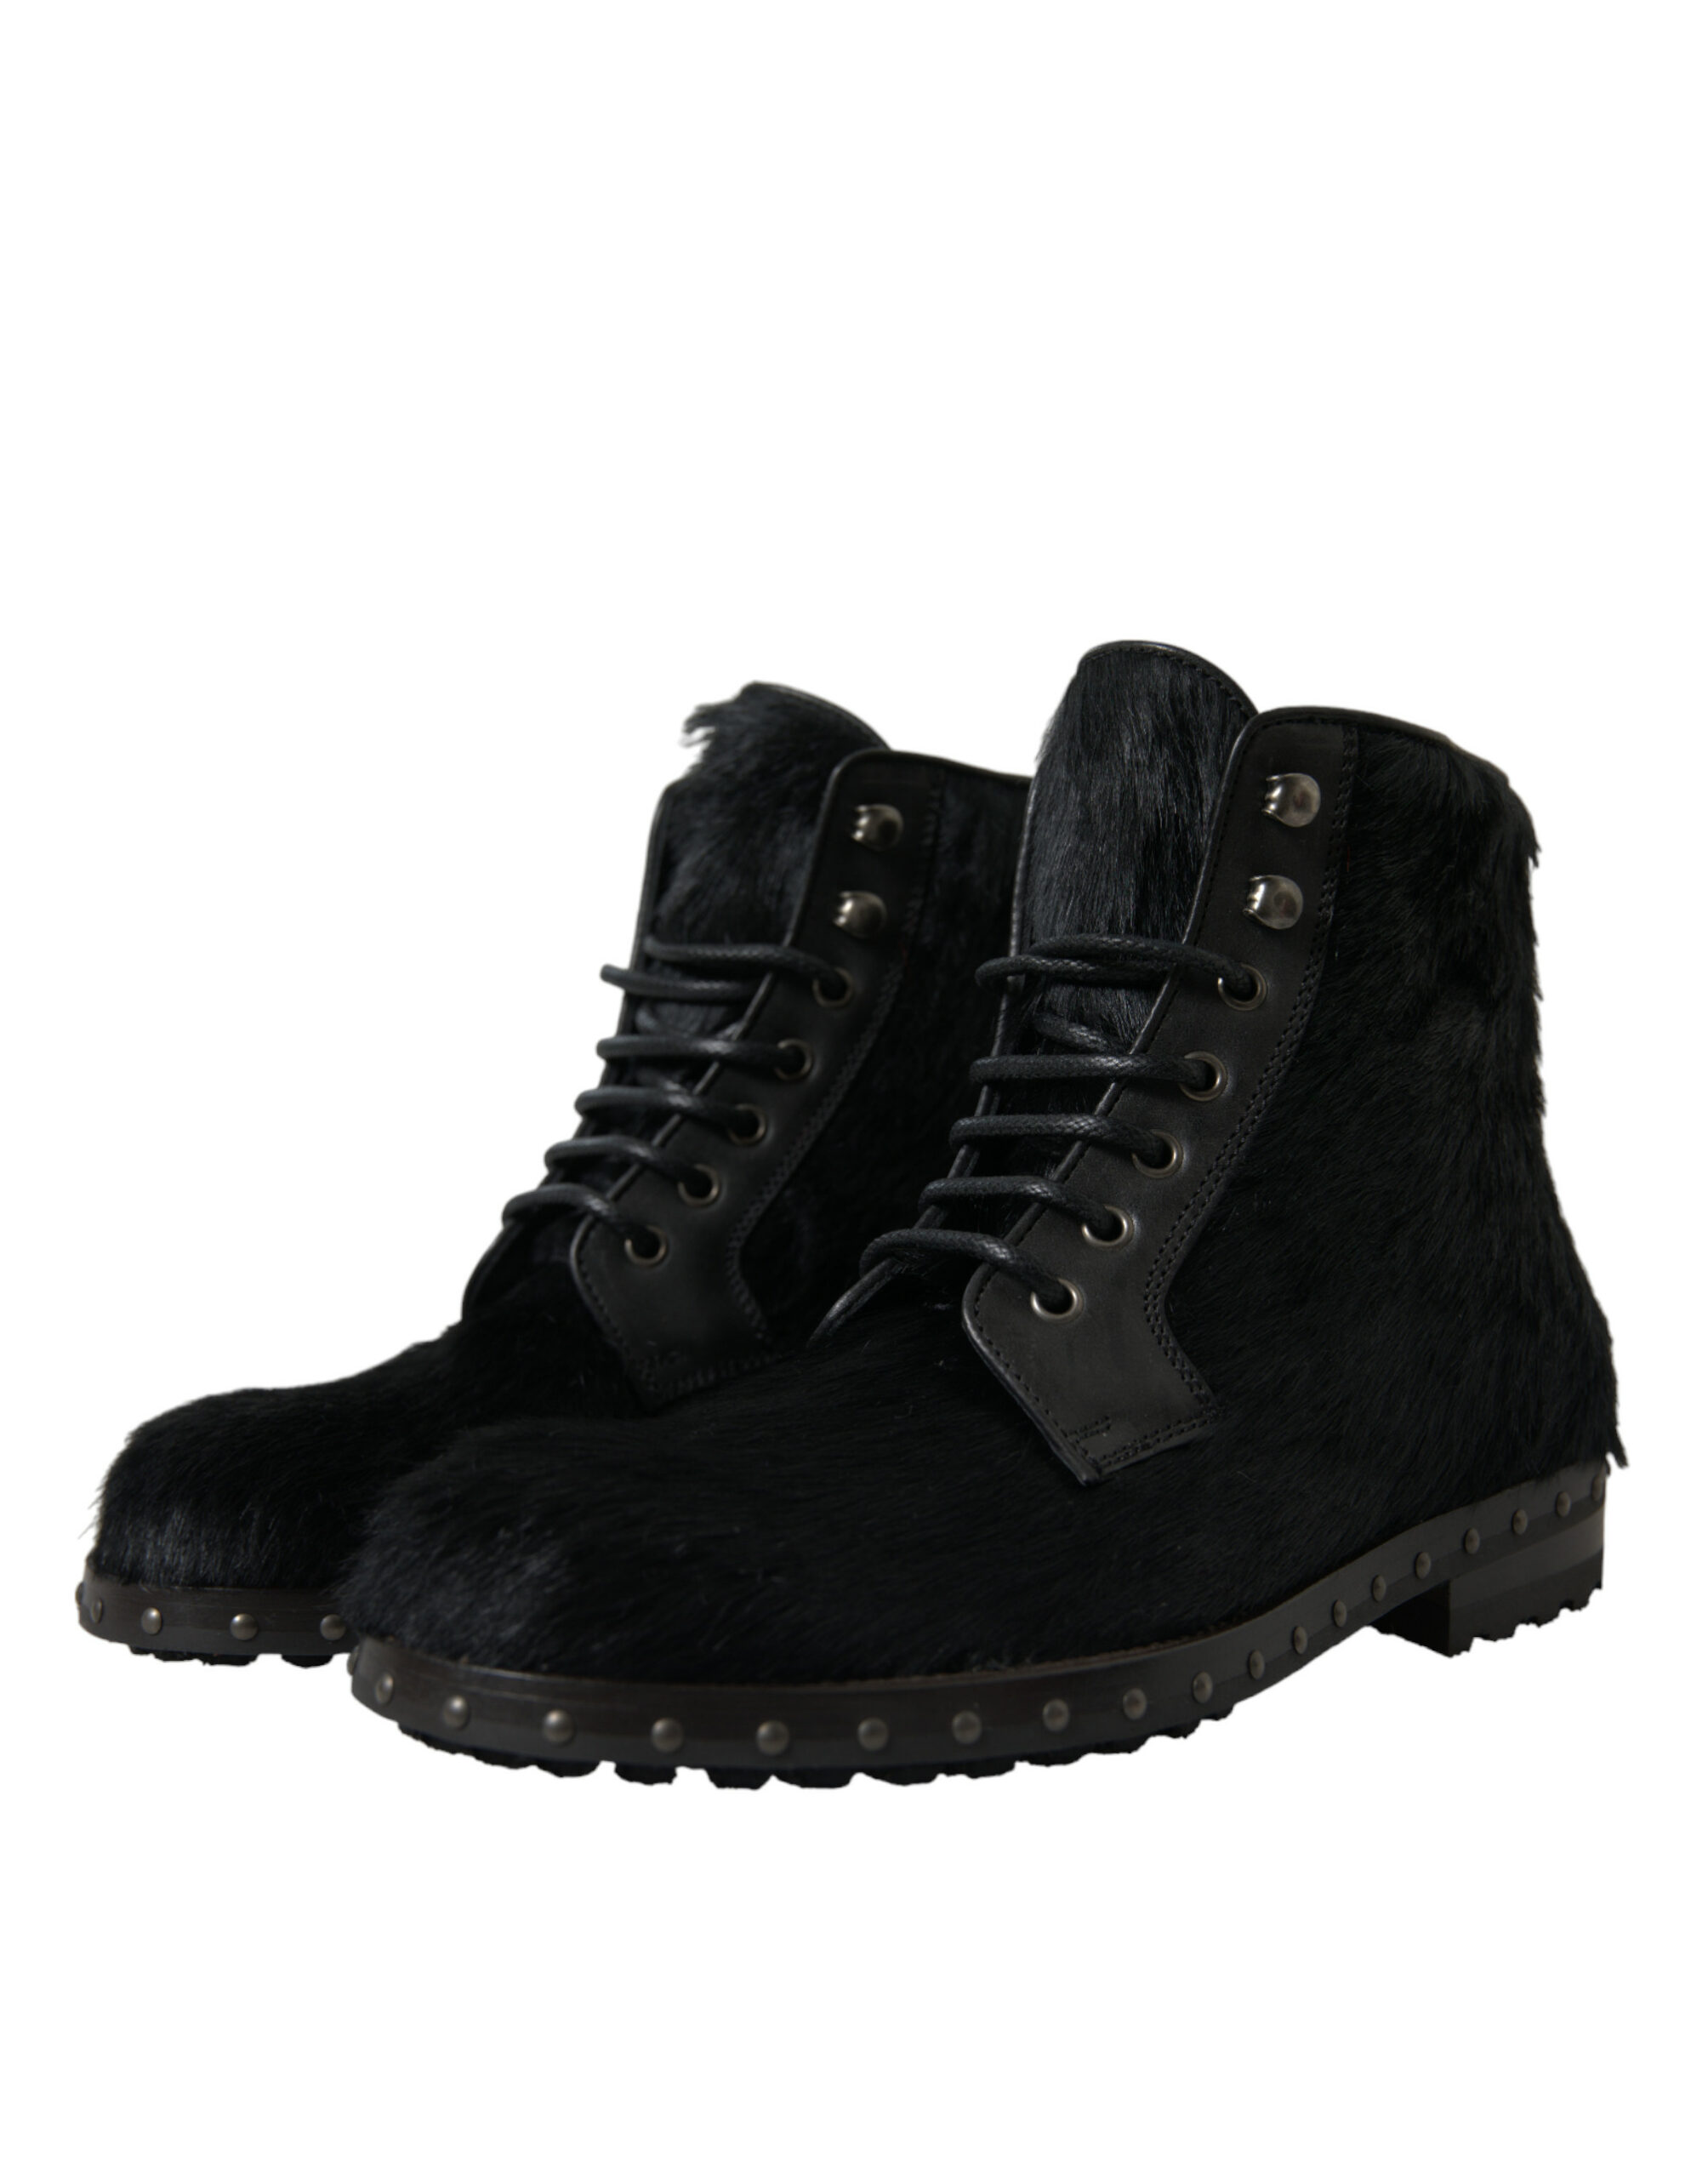 Leather Mid Calf Lace-up Boots with Rubber Sole